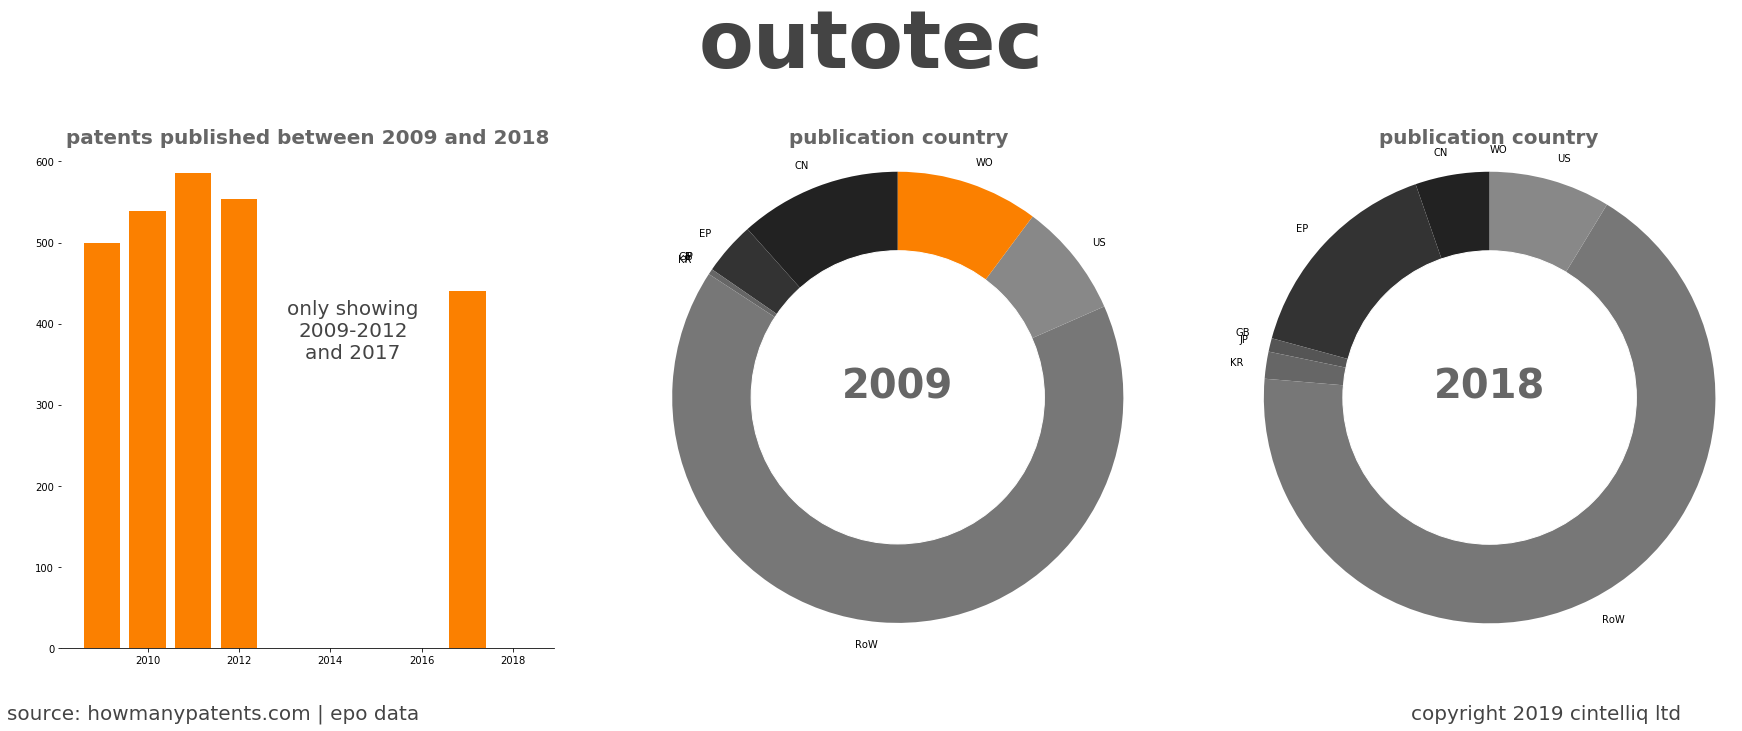 summary of patents for Outotec